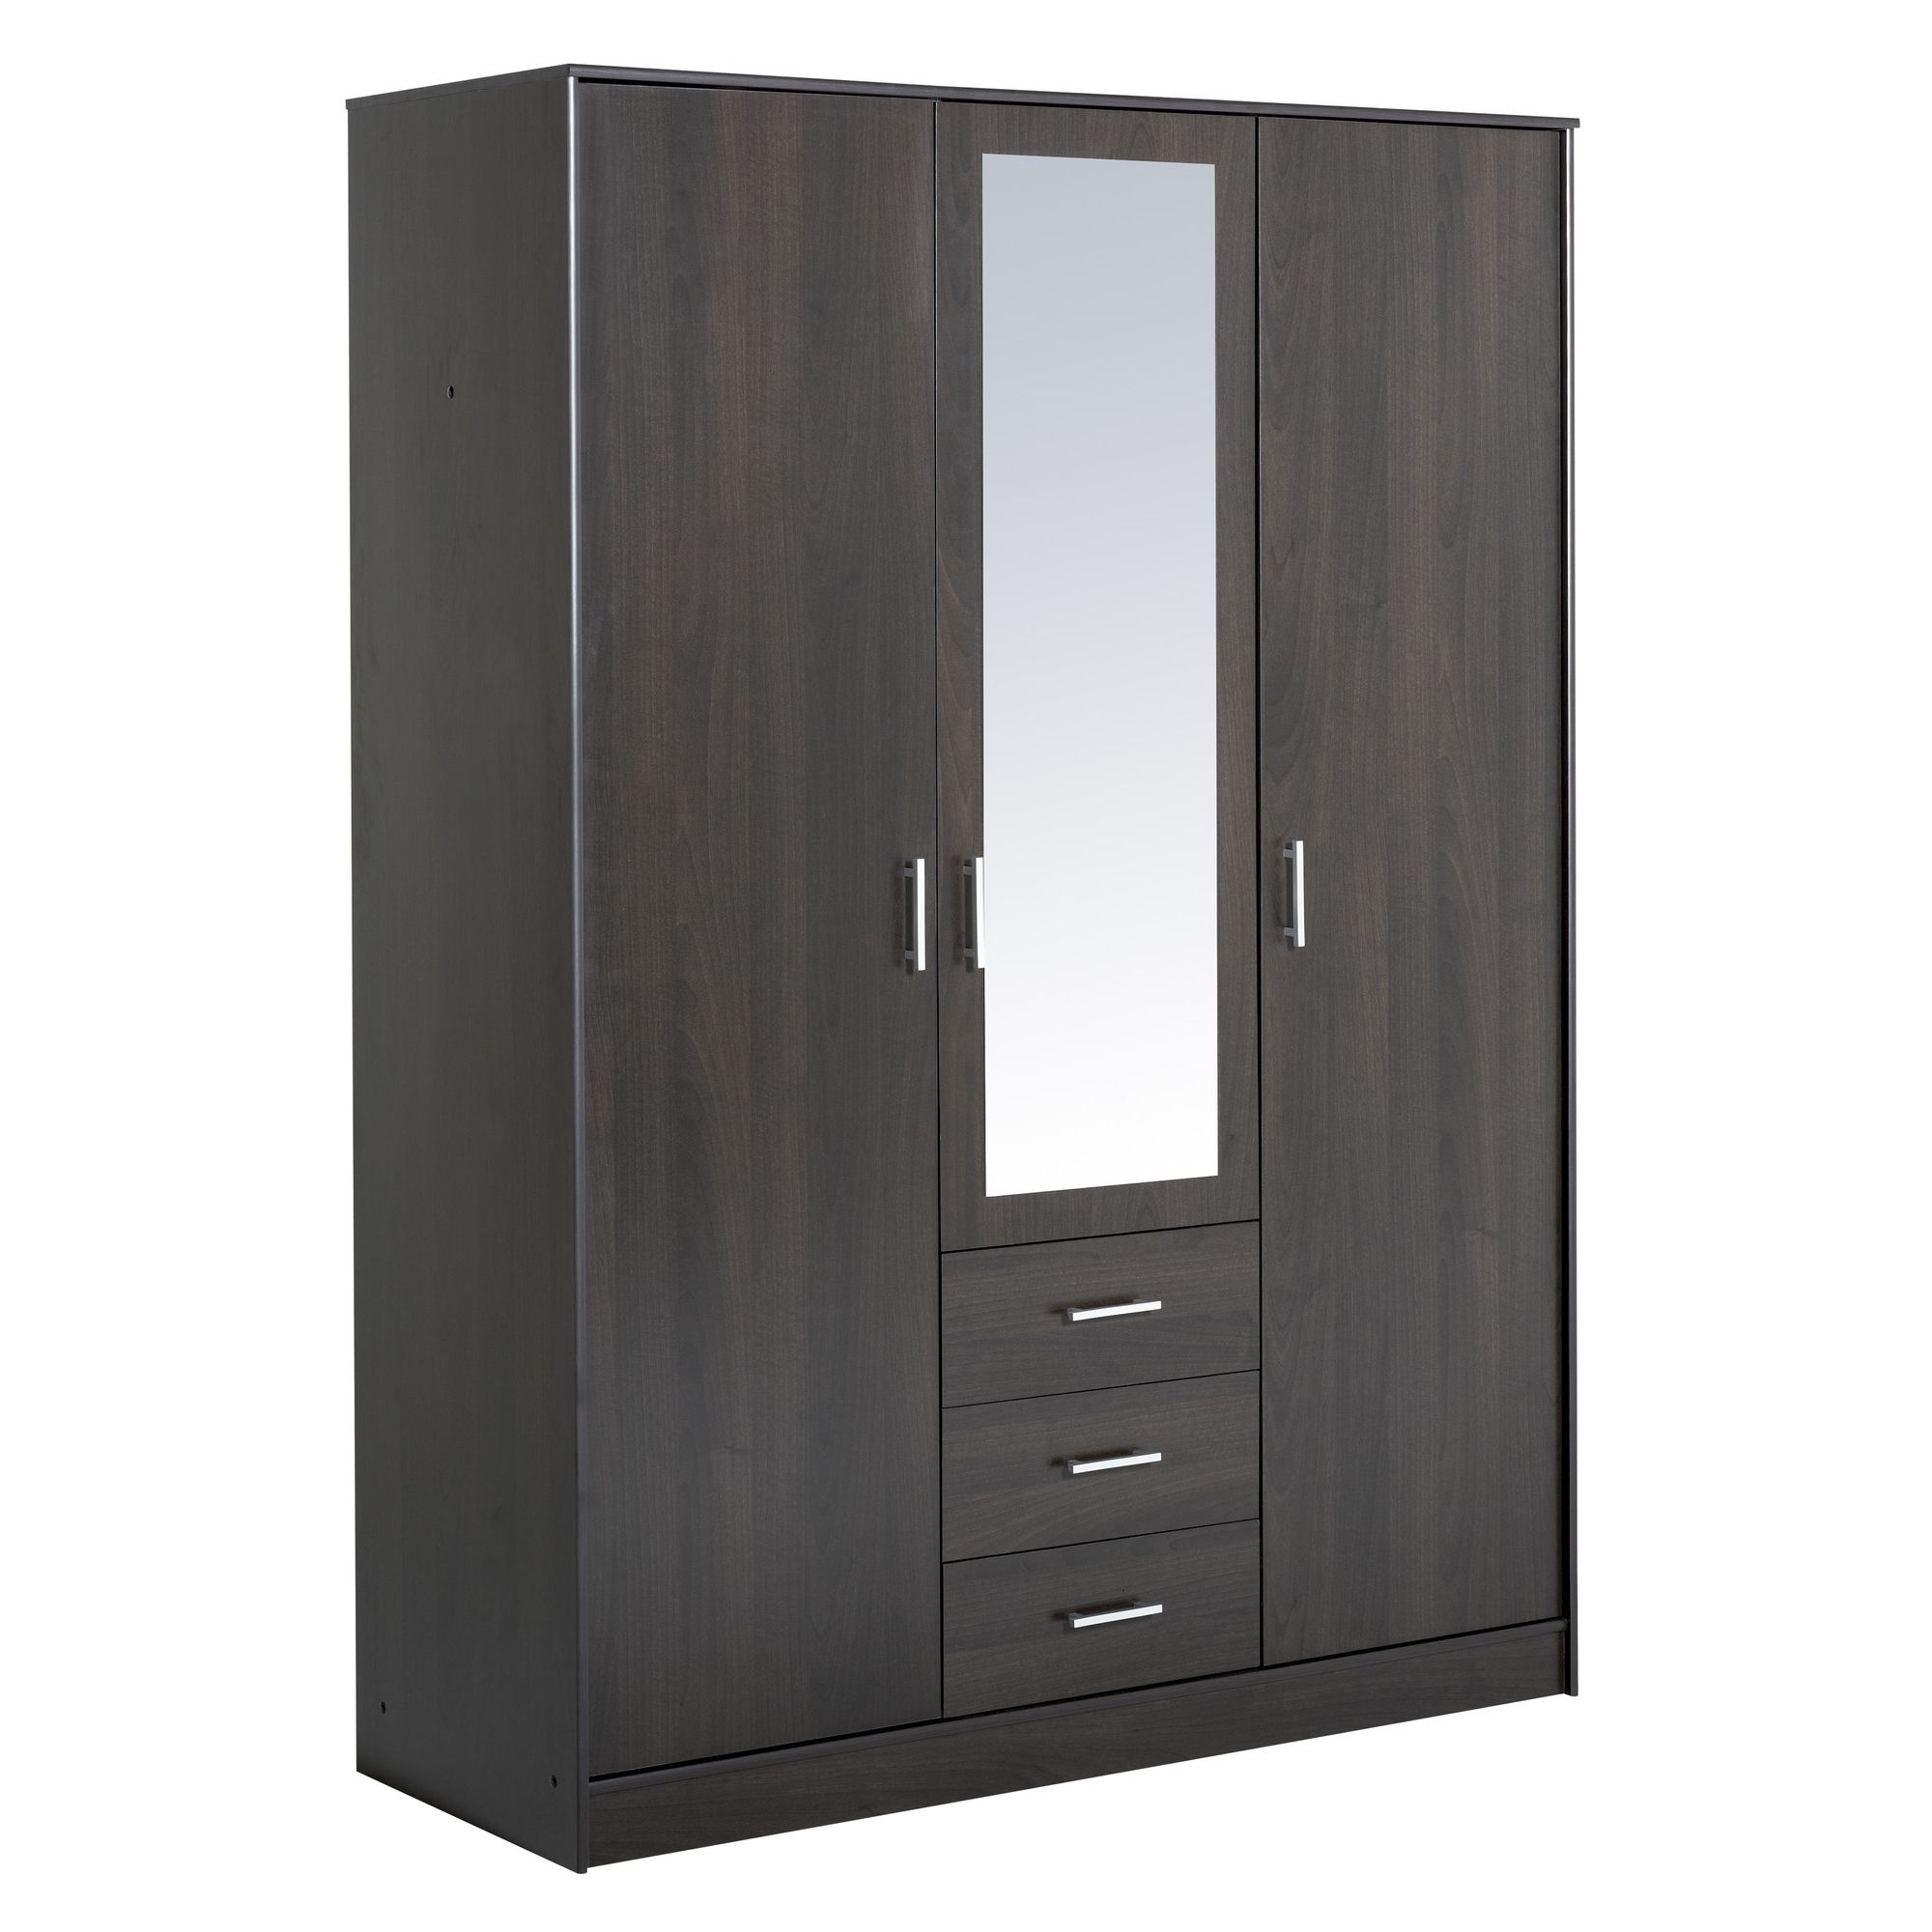 Parisot Essential Wardrobe with 3 Doors and 3 Drawers - Coffee Effect at Tesco Direct